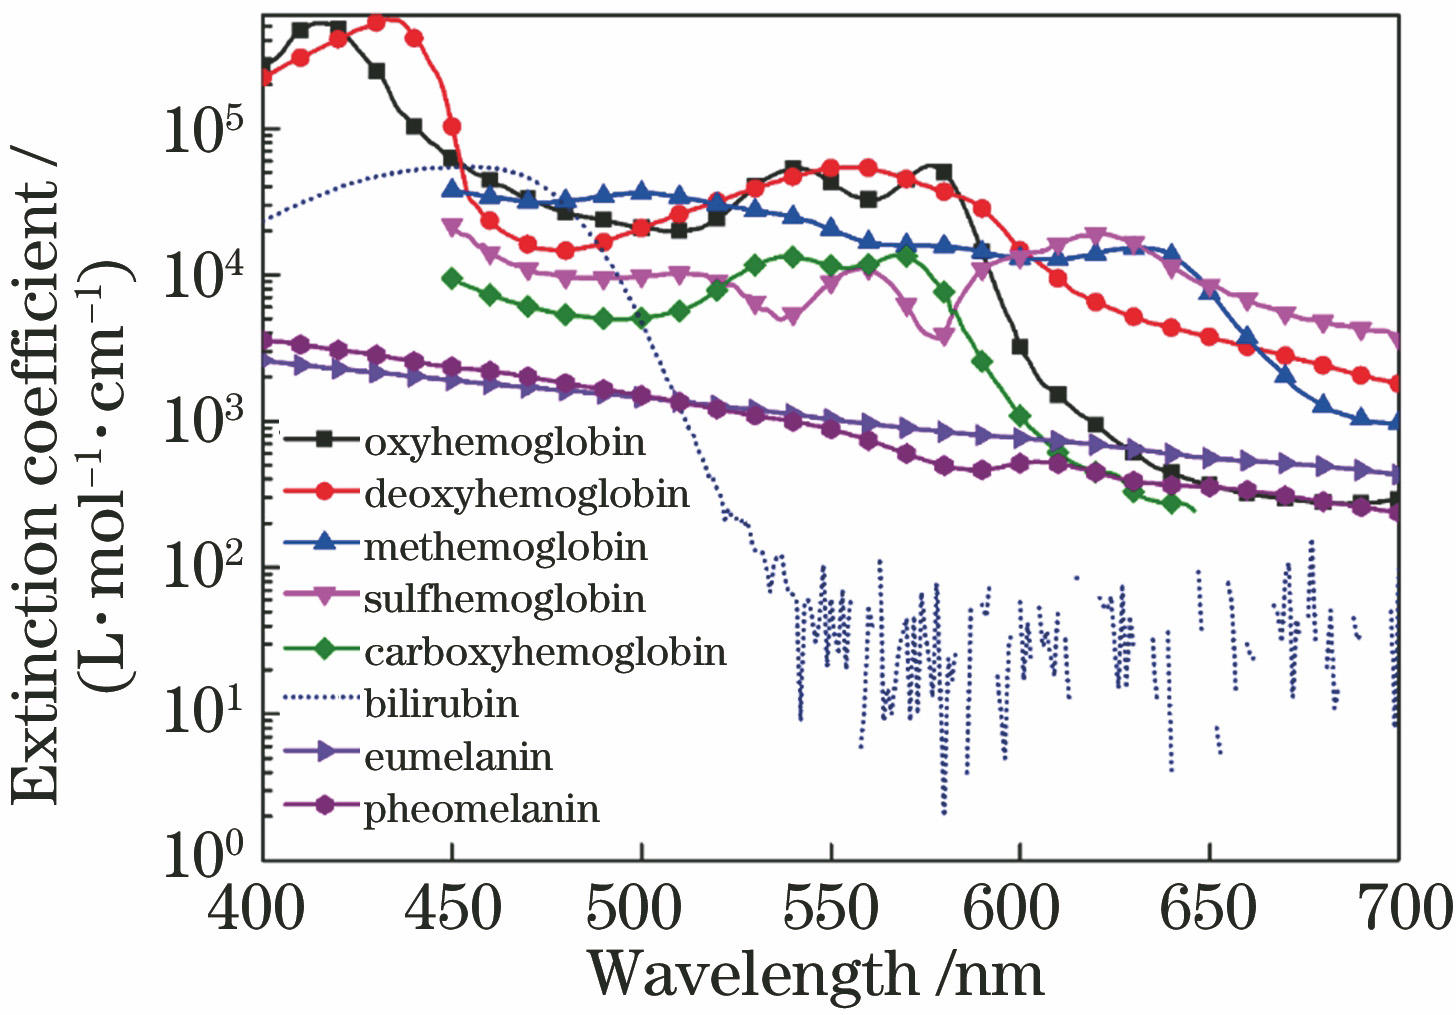 Molar extinction coefficient spectra of various skin tissue components in visible light band